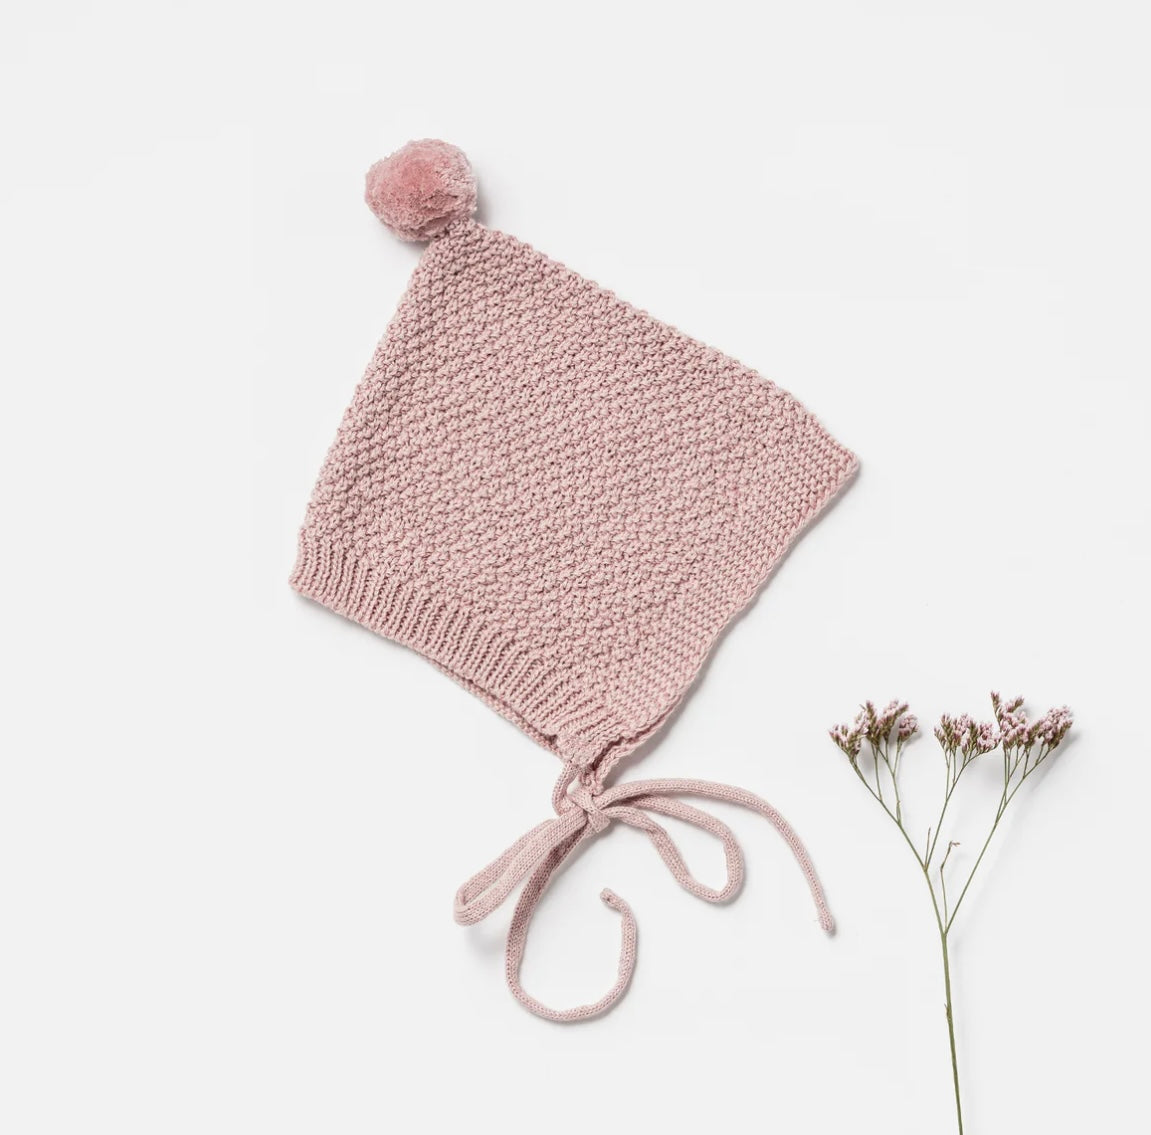 Bonnet with Pompom in Dusk